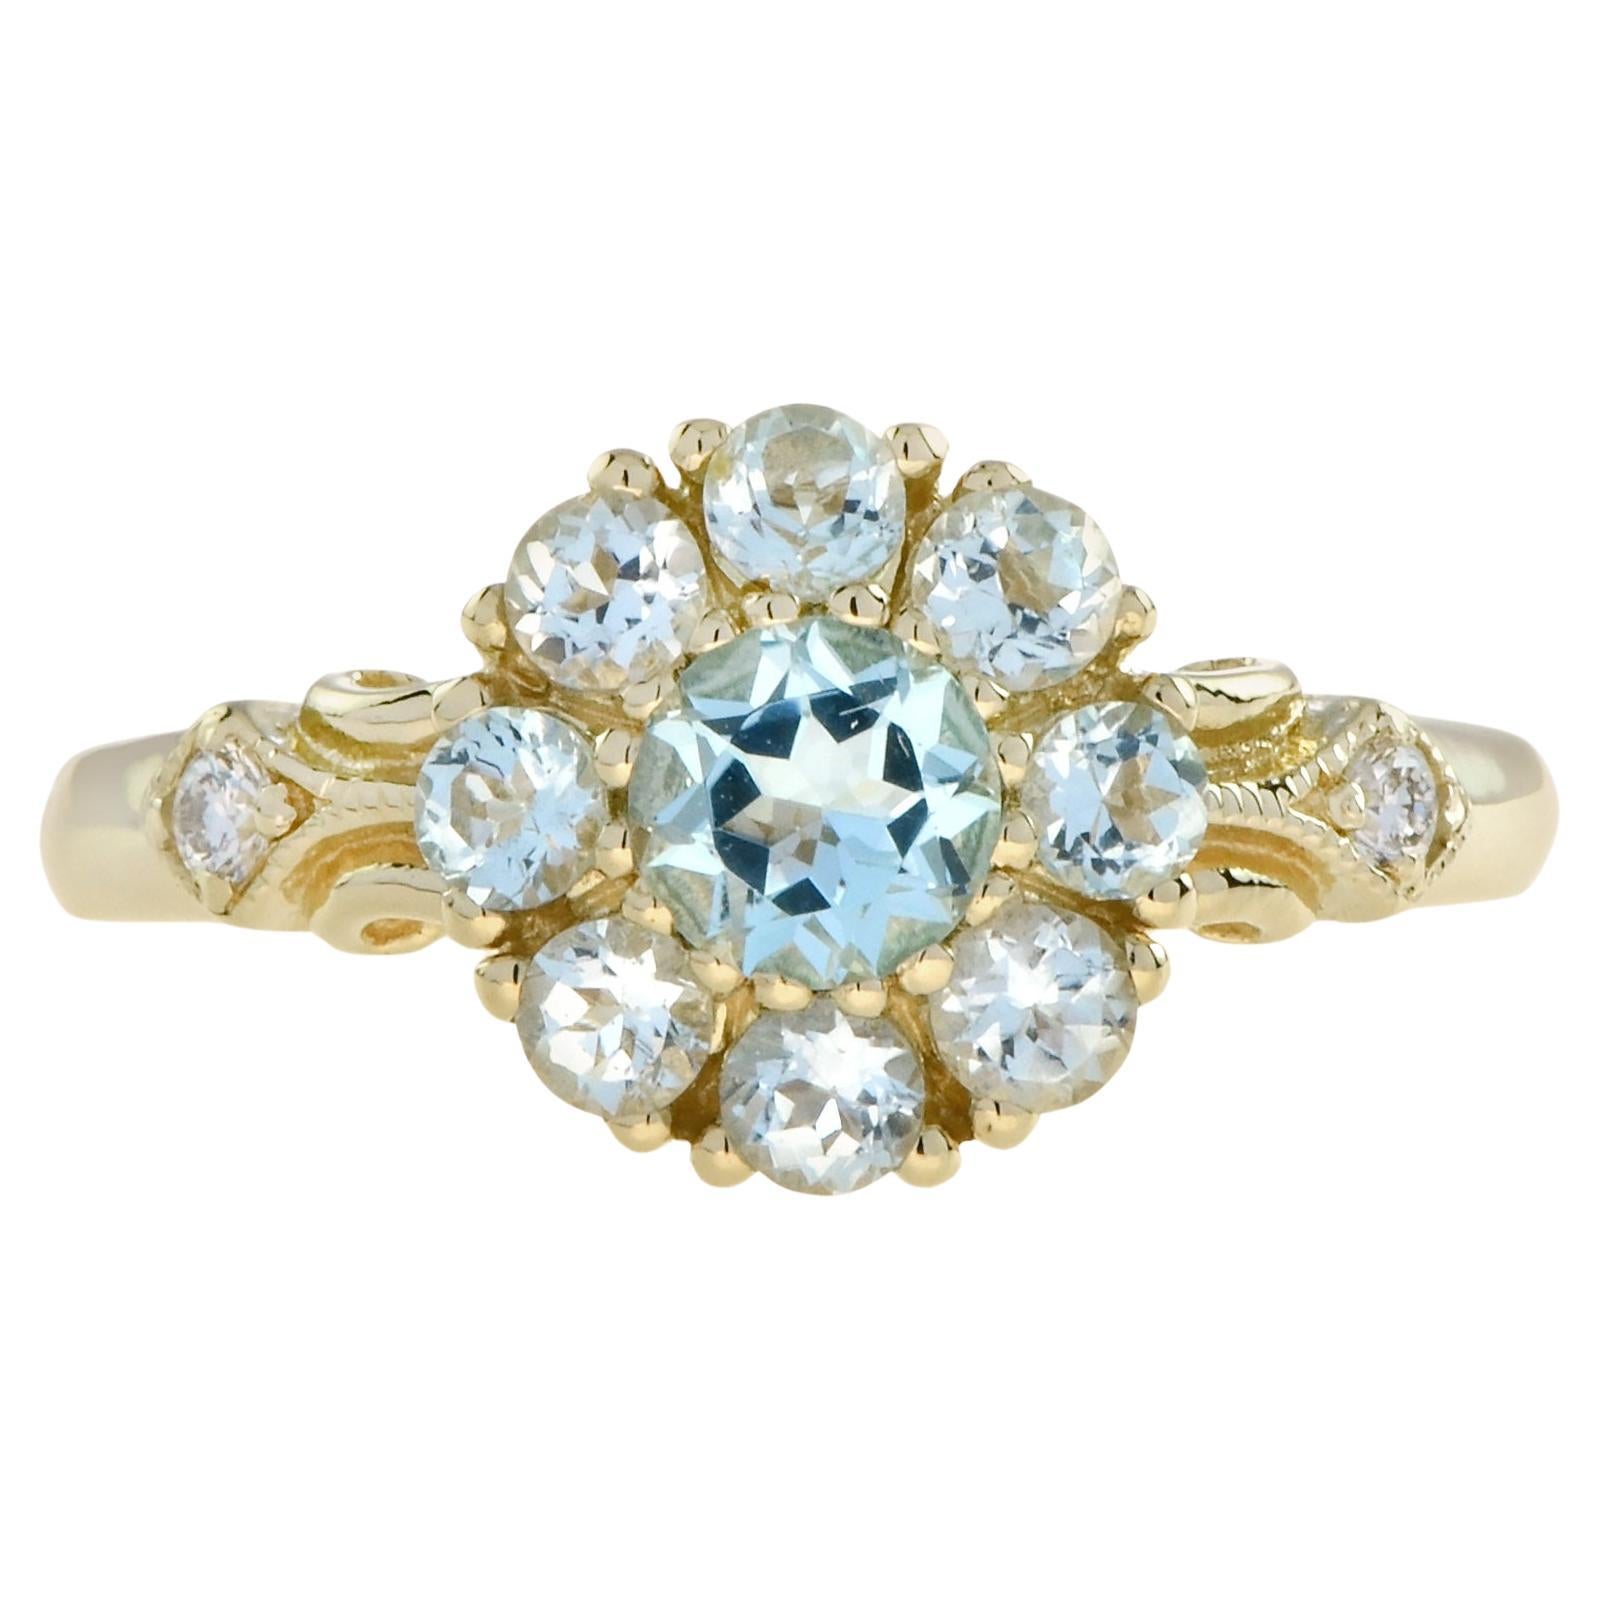 Blue Topaz and Diamond Vintage Style Floral Cluster Ring in 14K Yellow Gold